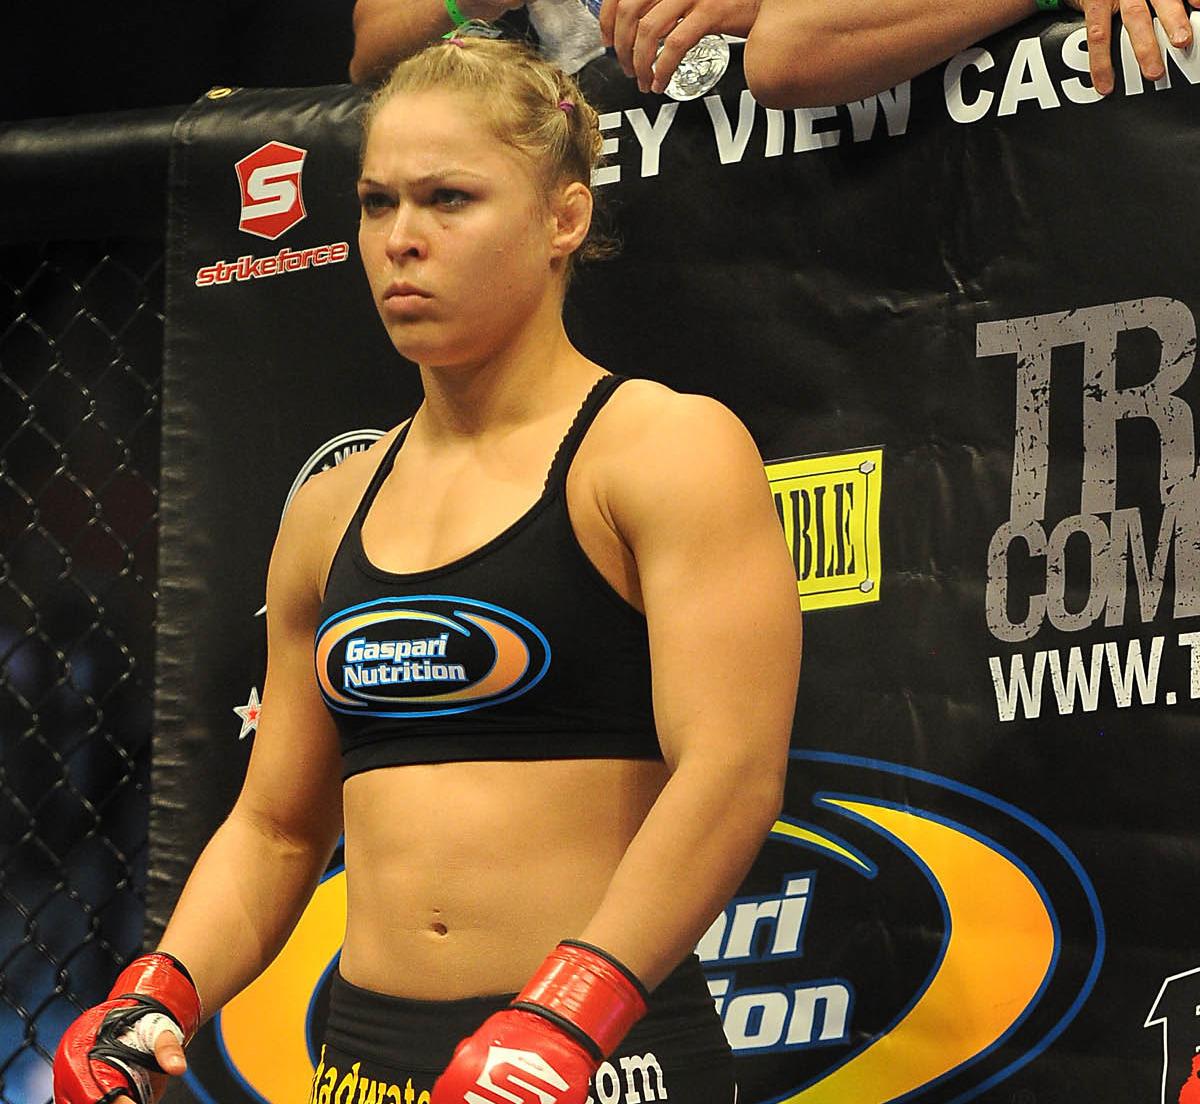 Ronda Rousey: More concerned with sports bra than Liz Carmouche